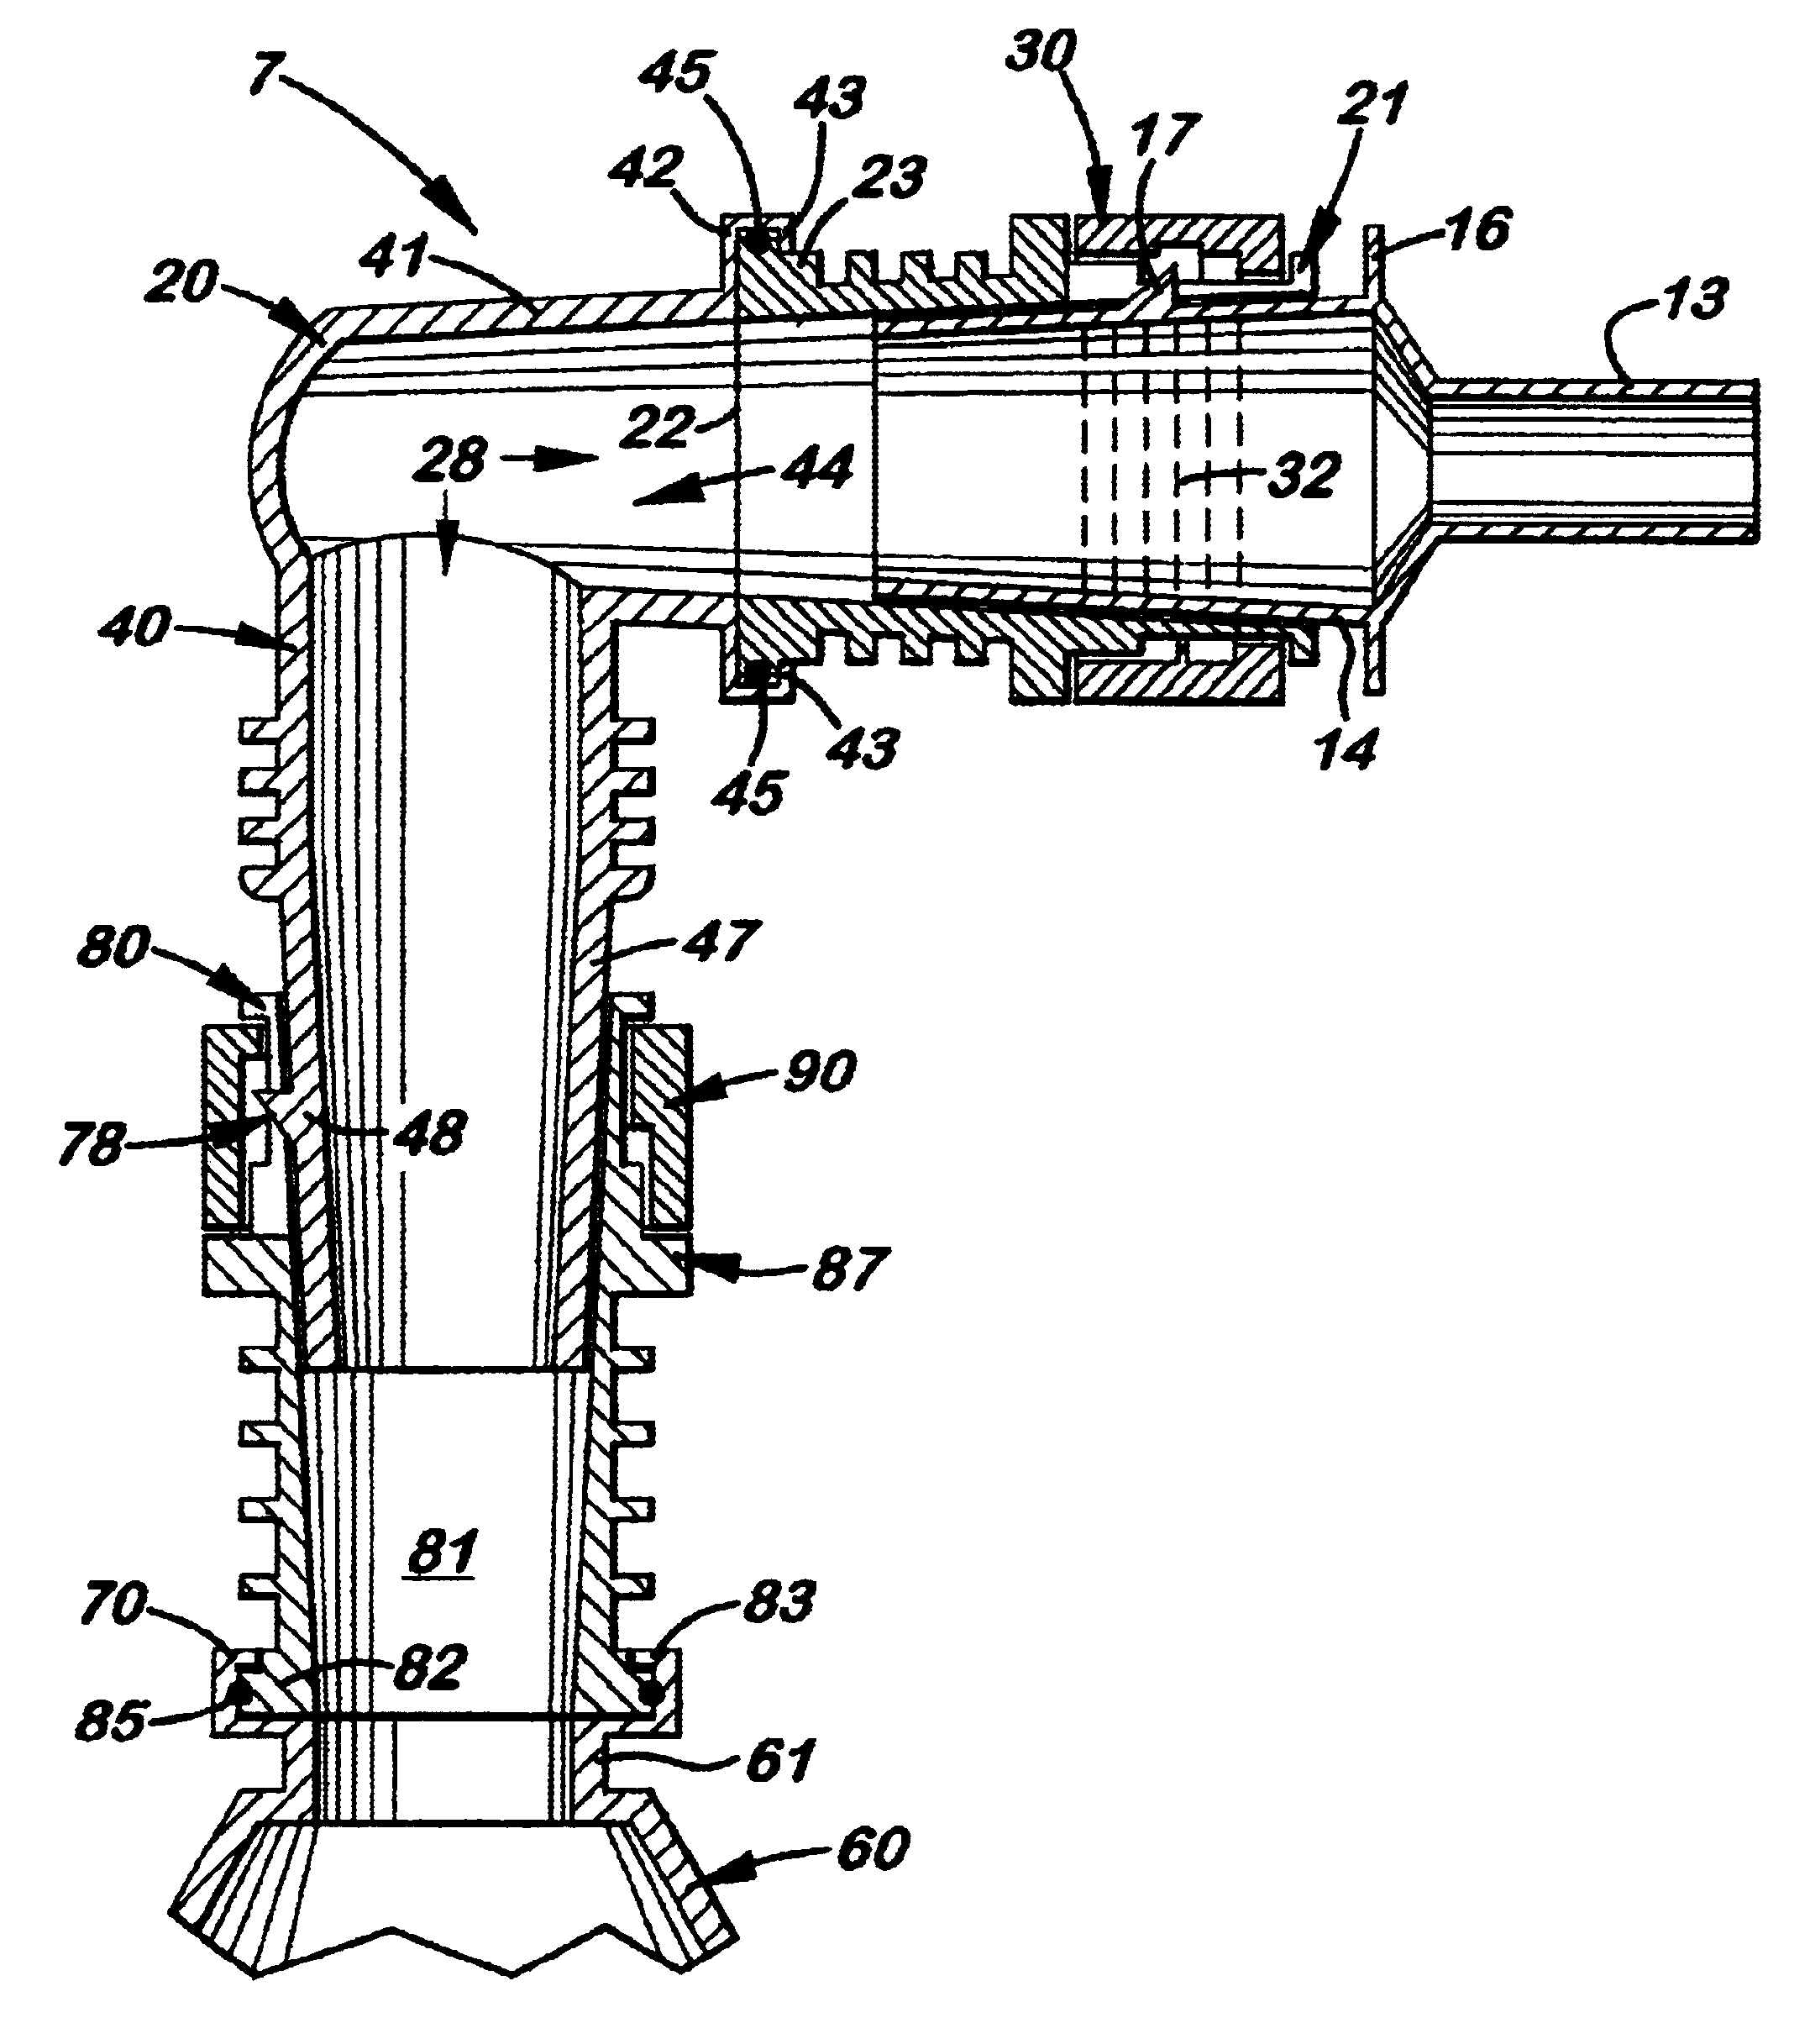 Ventilation tube connection system